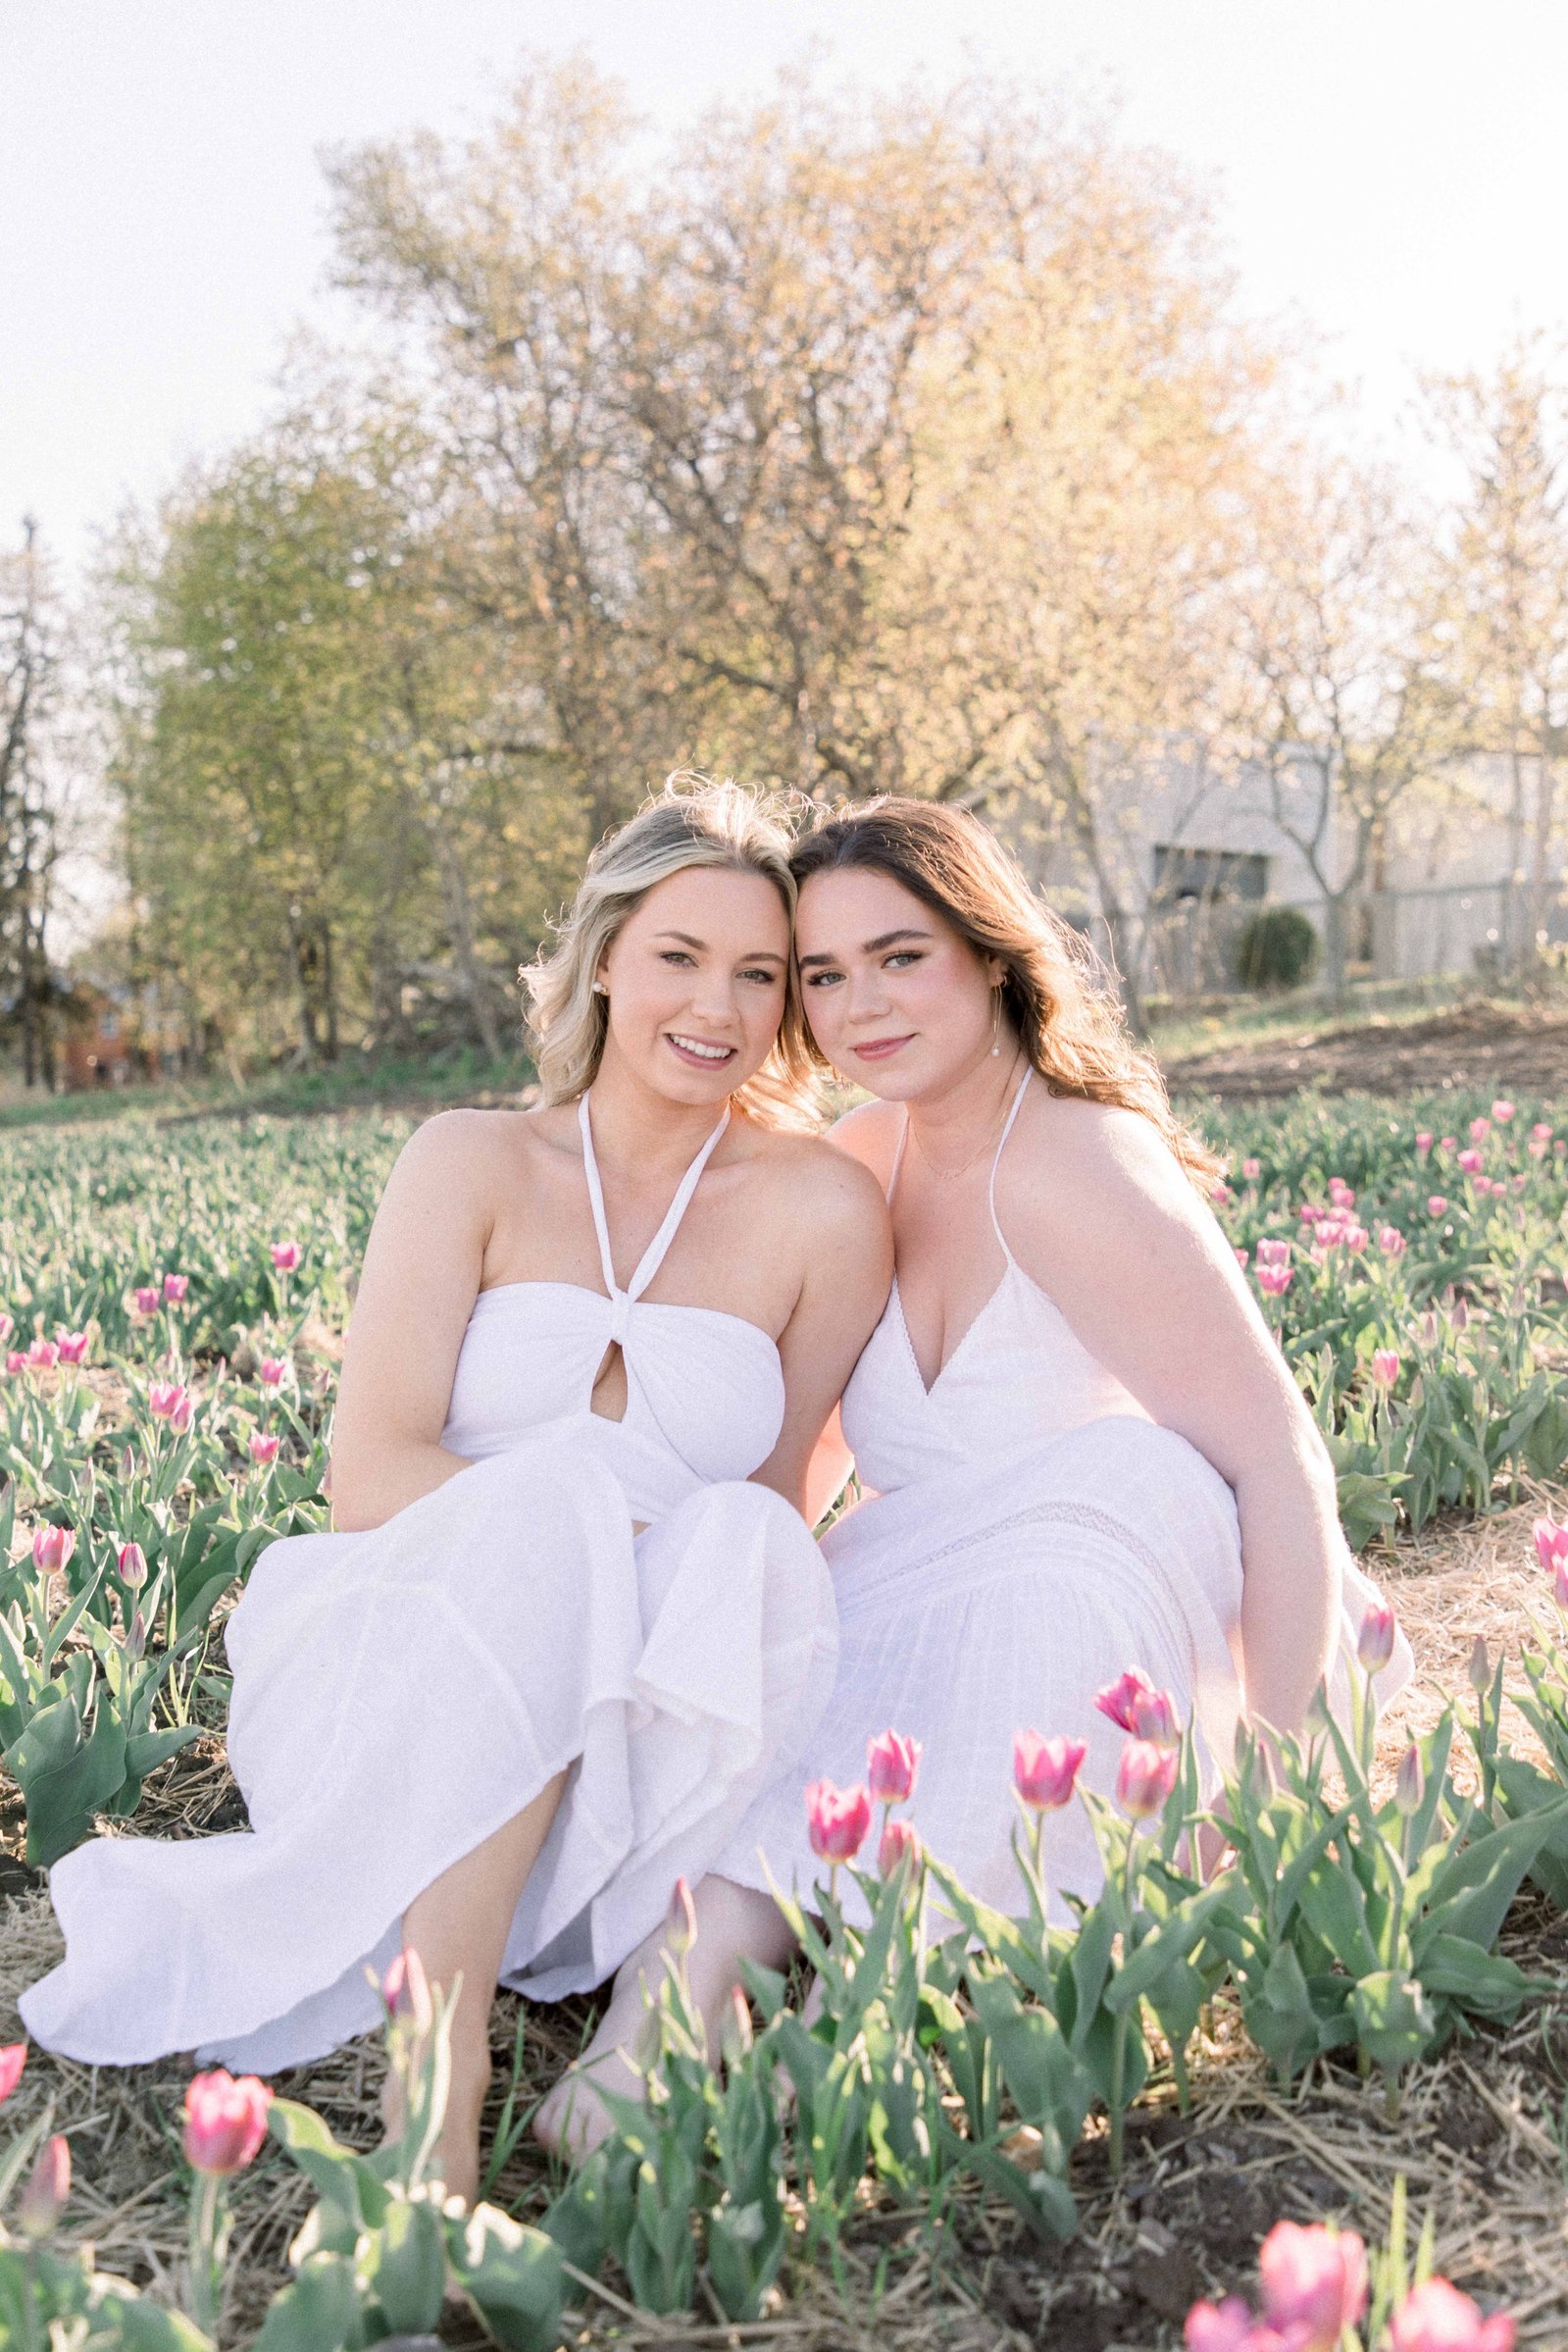 Portrait of two sisters in white dresses with their heads together, looking into the camera. Vankleek Hill Portrait Photographer, L'Orignal, Champlain, Prescott-Russell, Family Photography, Candid Photography, Emily VanderBeek Photography.